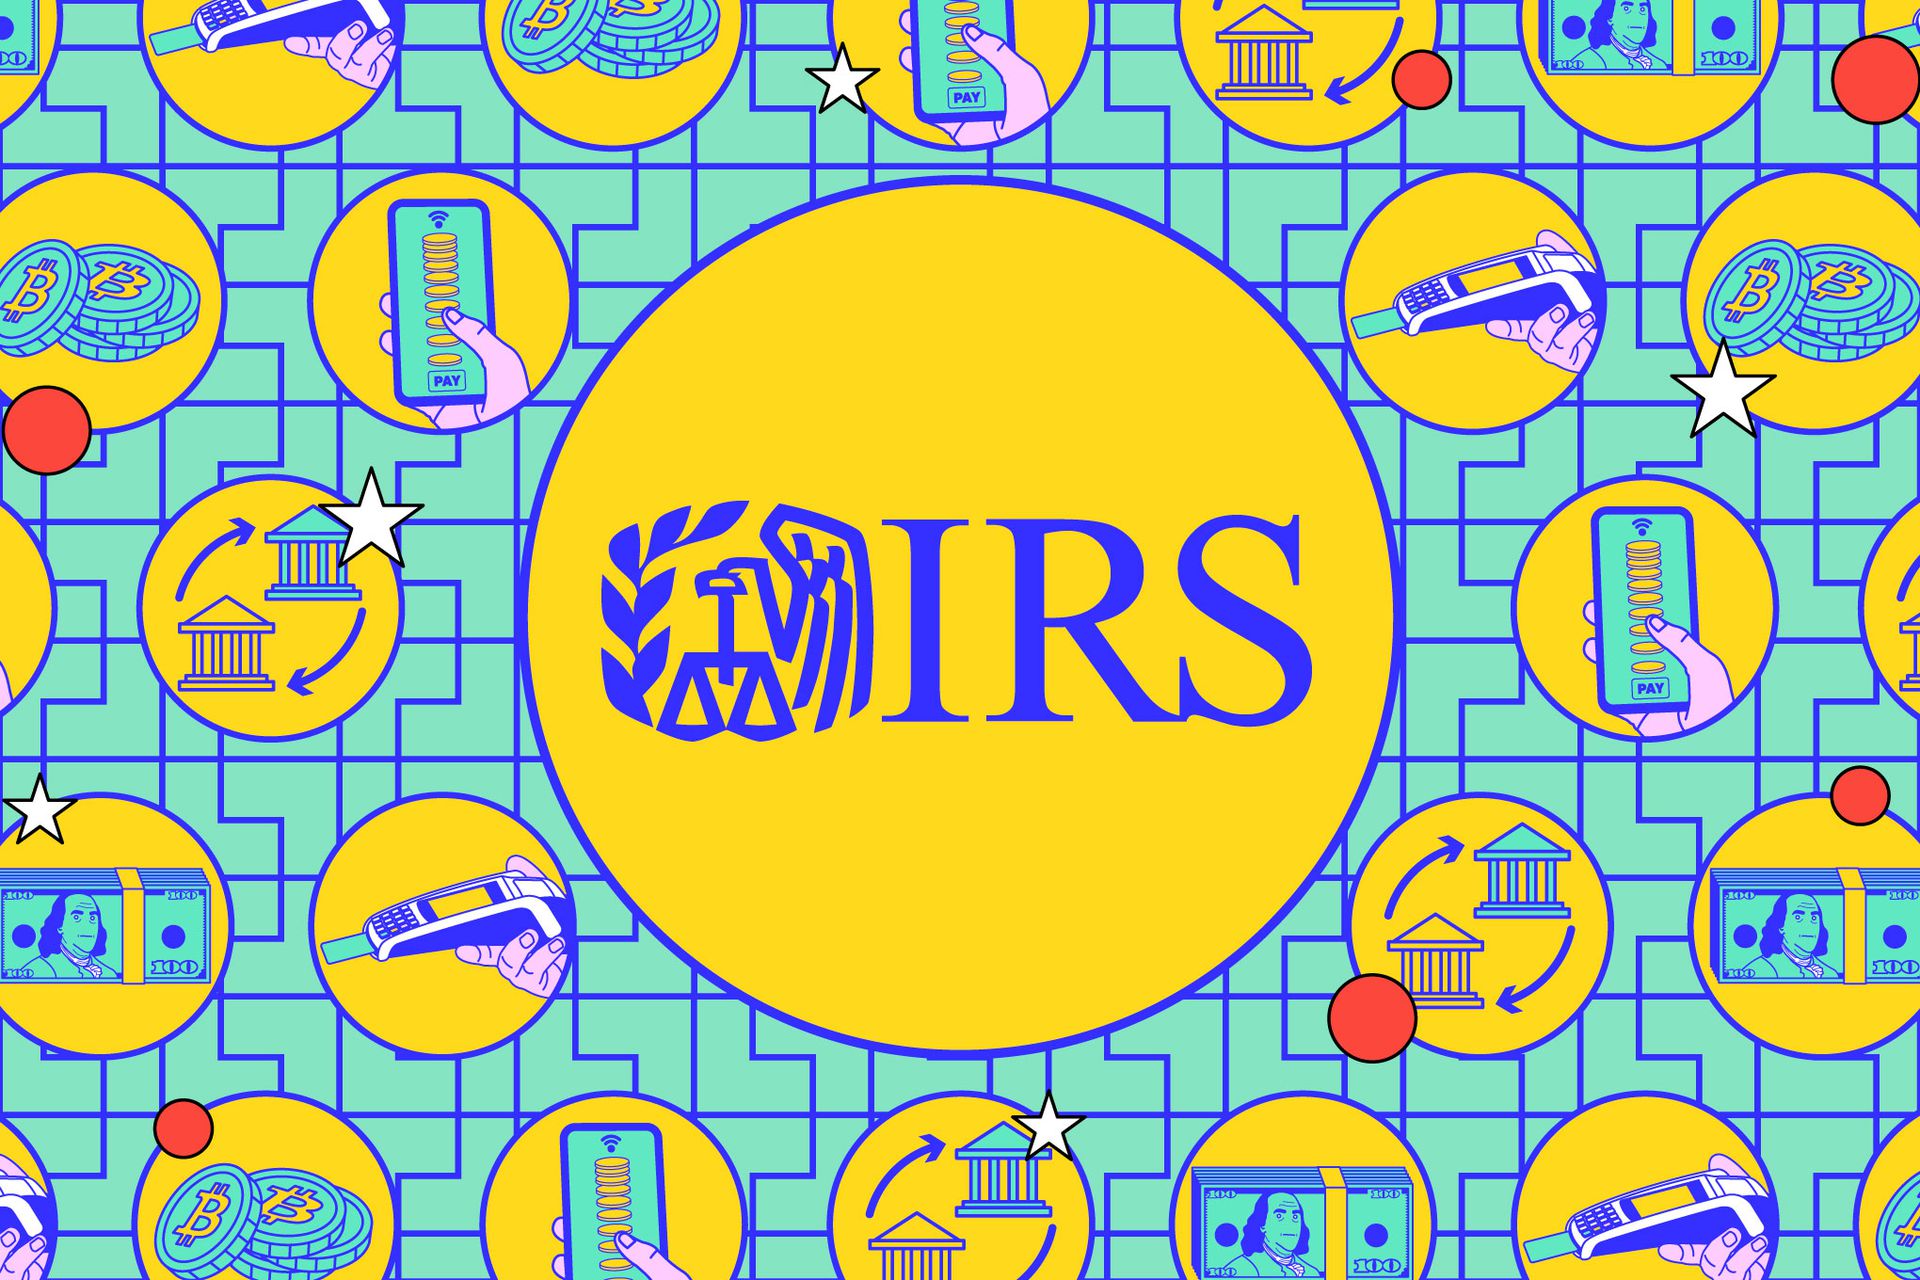 Directly filing taxes for free may be possible after 2024 IRS test run